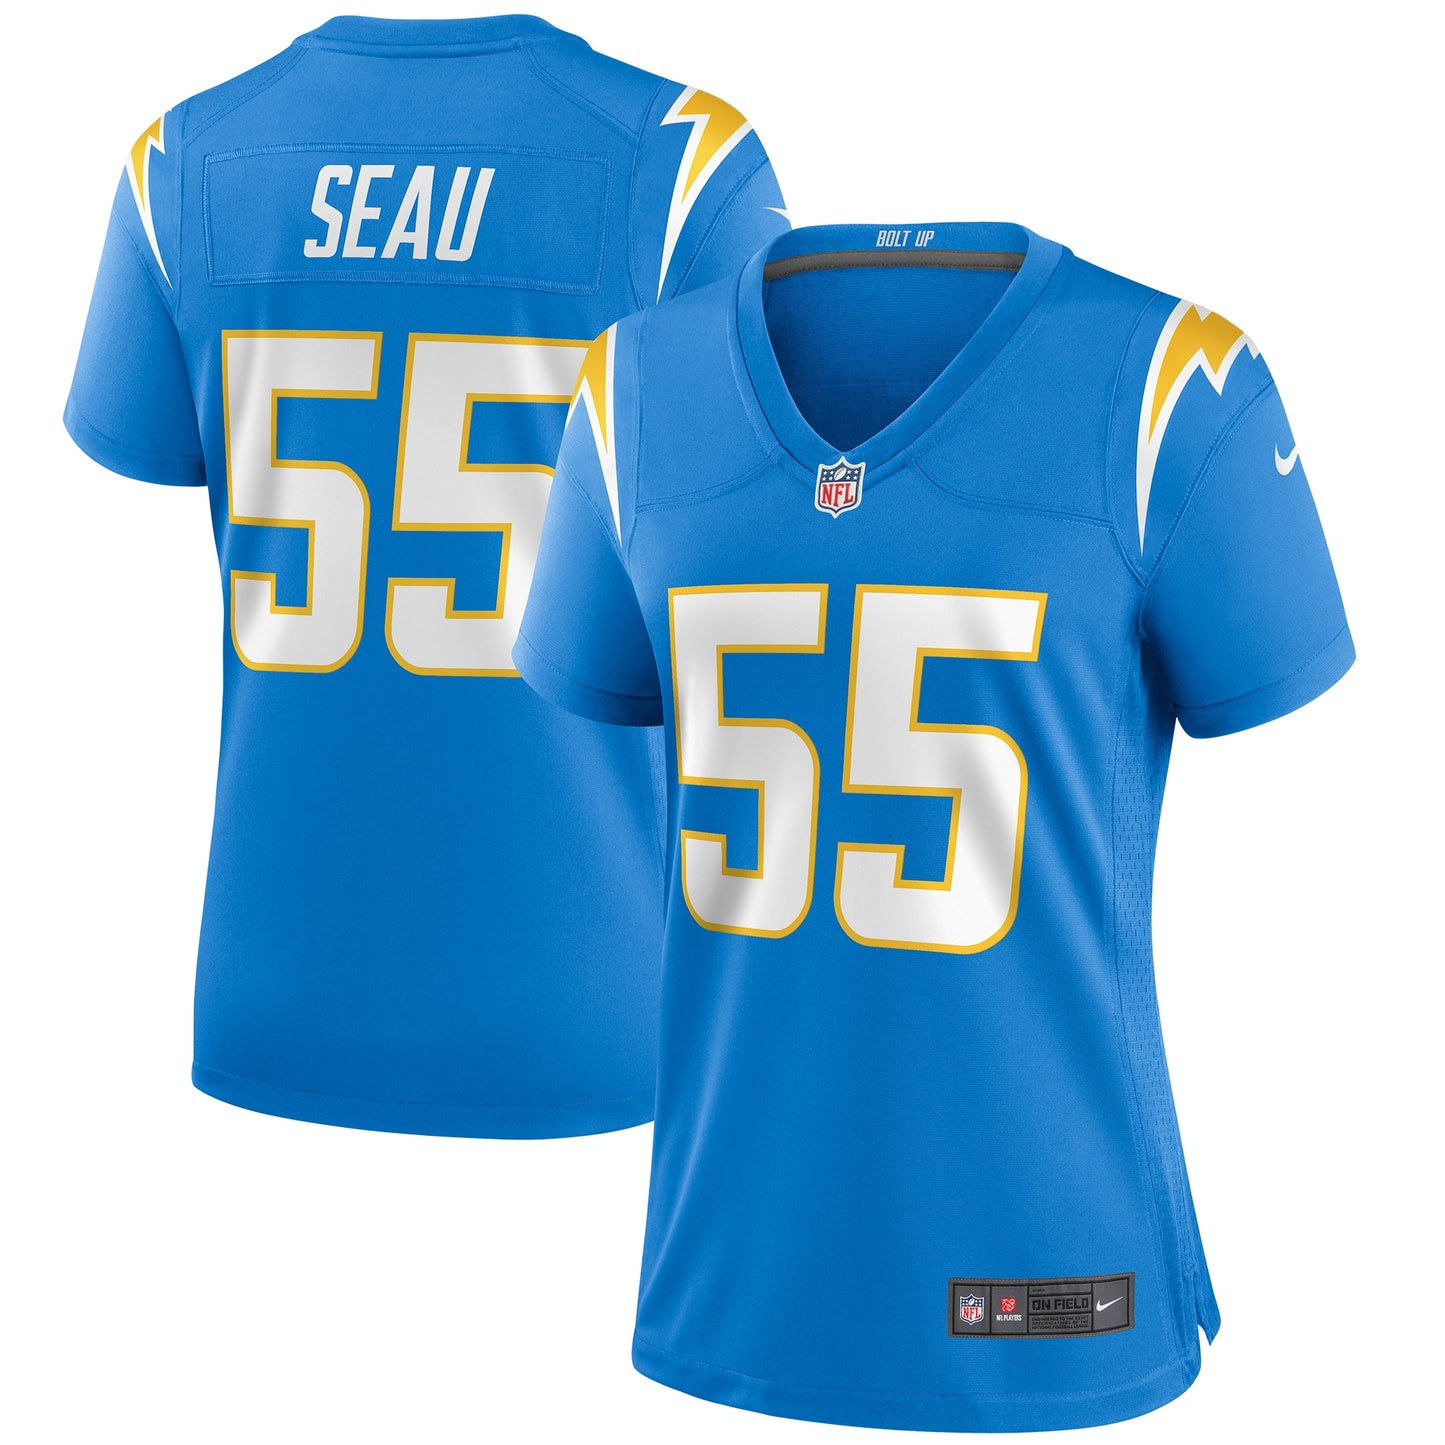 Junior Seau Los Angeles Chargers Nike Women's Game Retired Player Jersey - Powder Blue